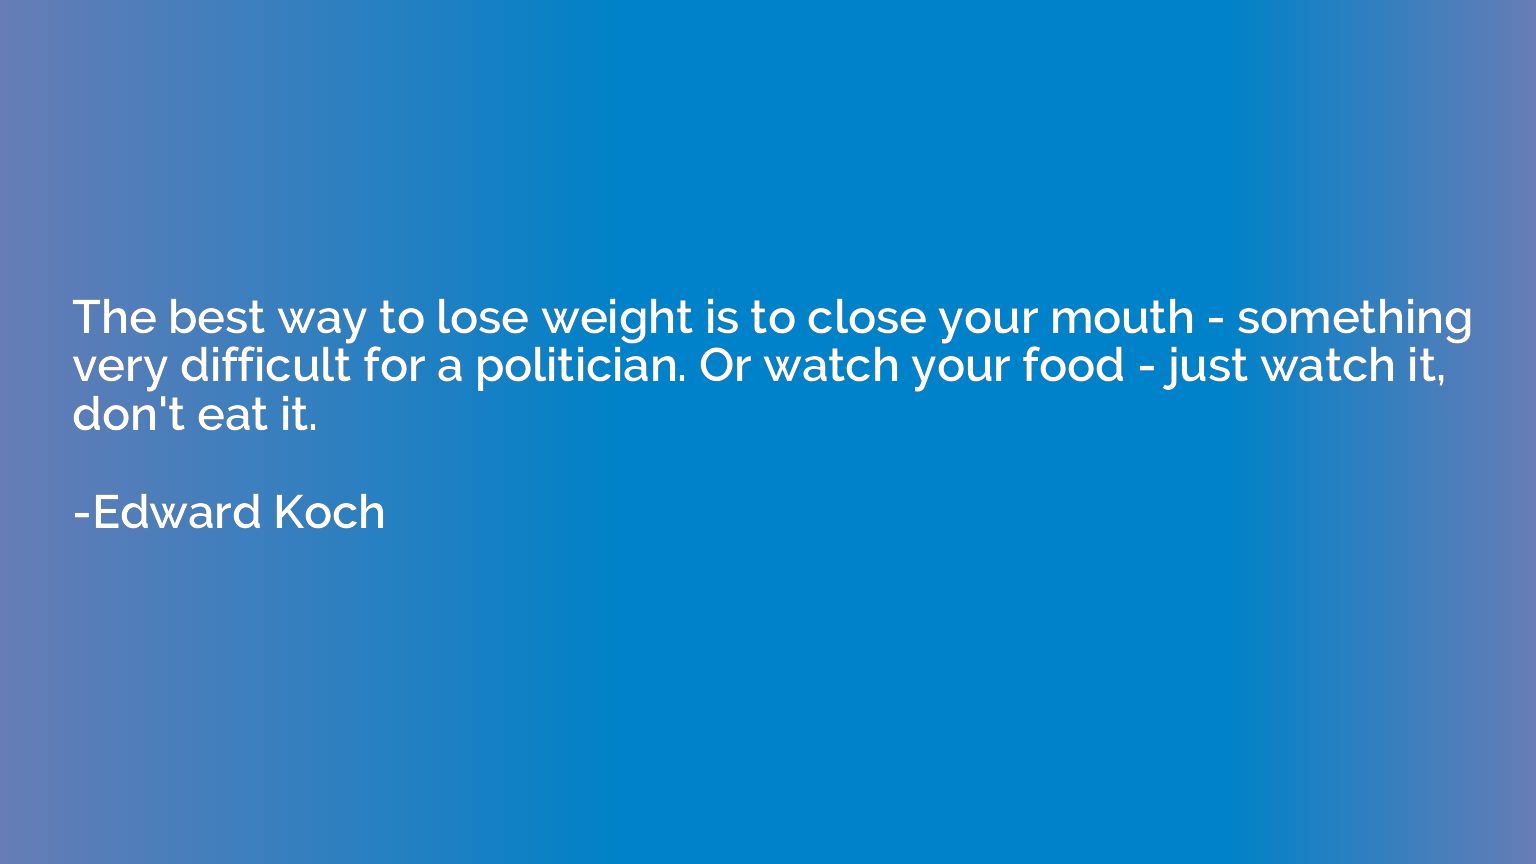 The best way to lose weight is to close your mouth - somethi